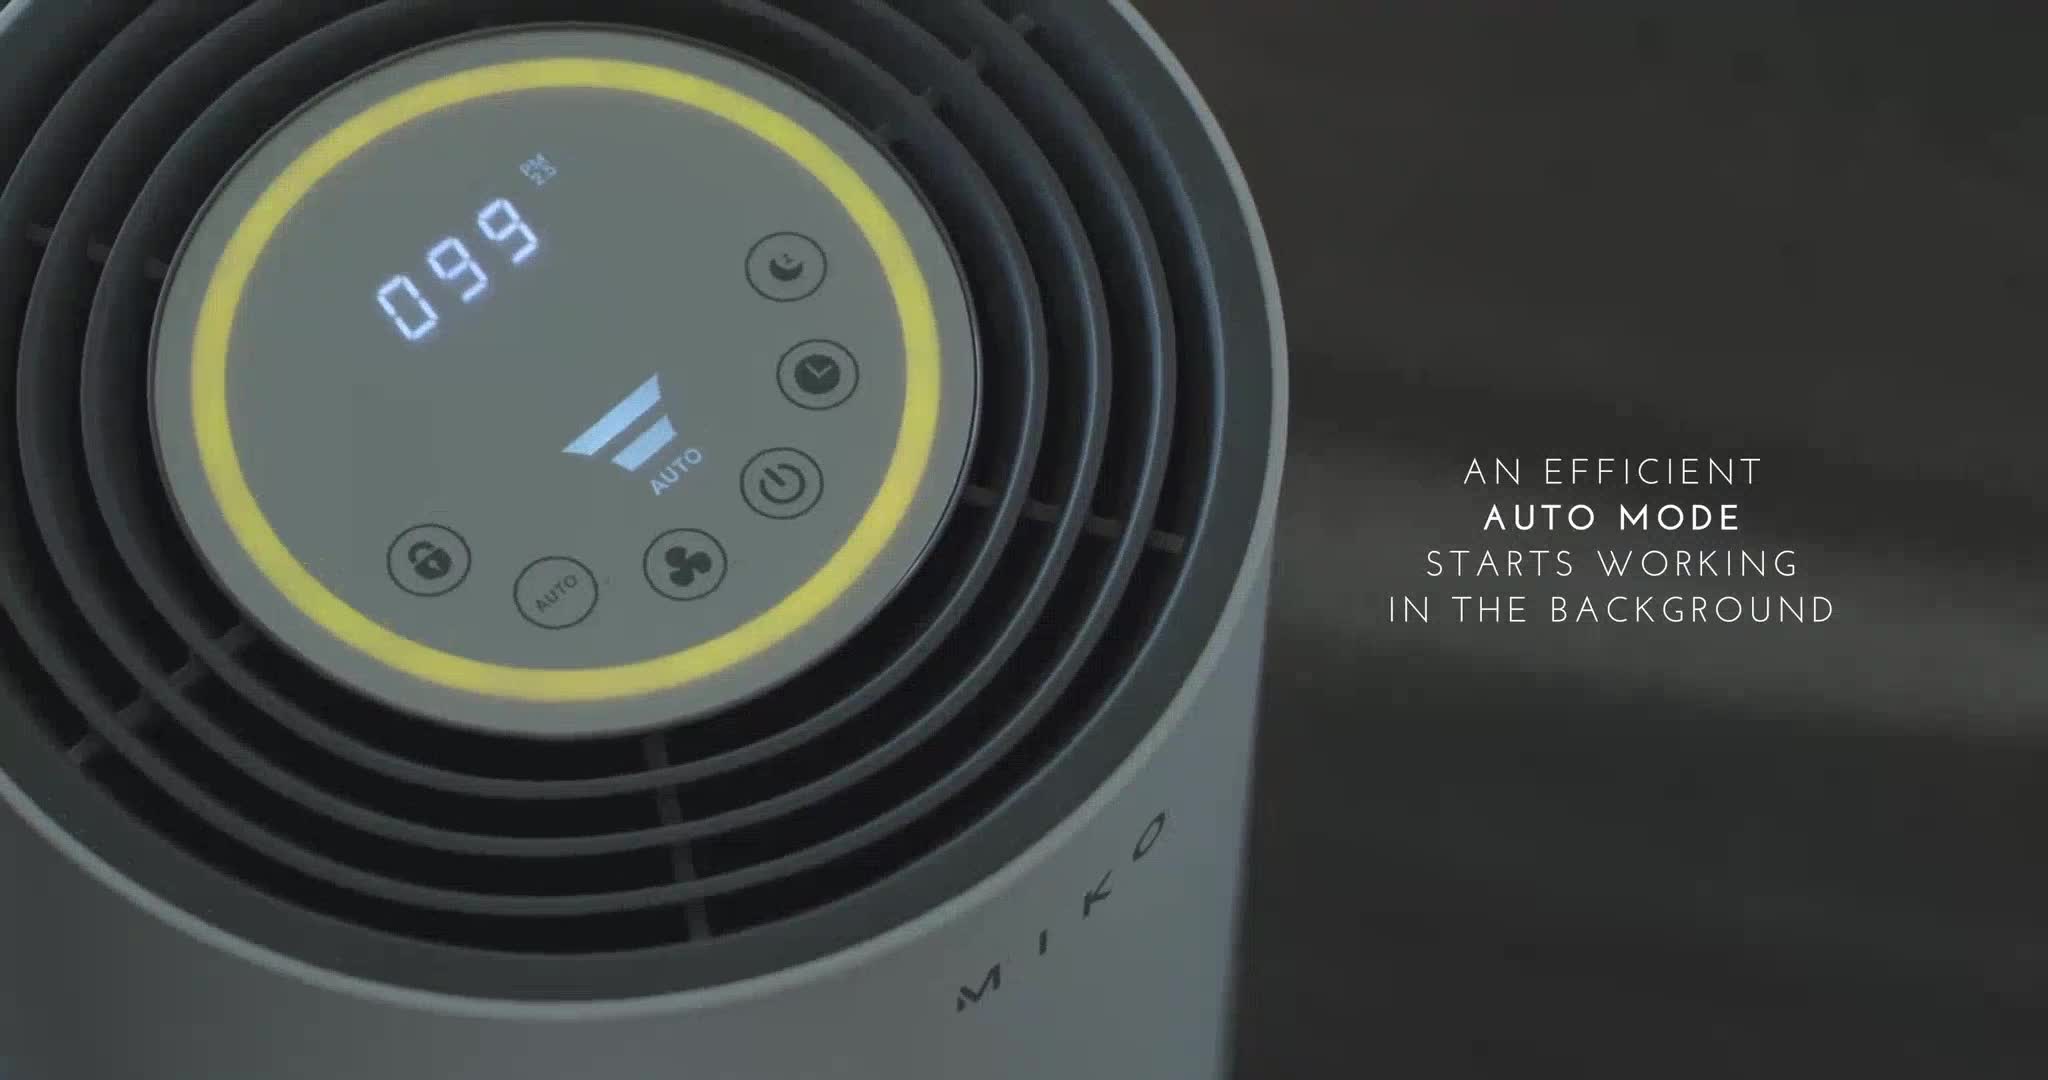 Miko Air Purifier For Home with Air Quality Indicator // Ibuki-M